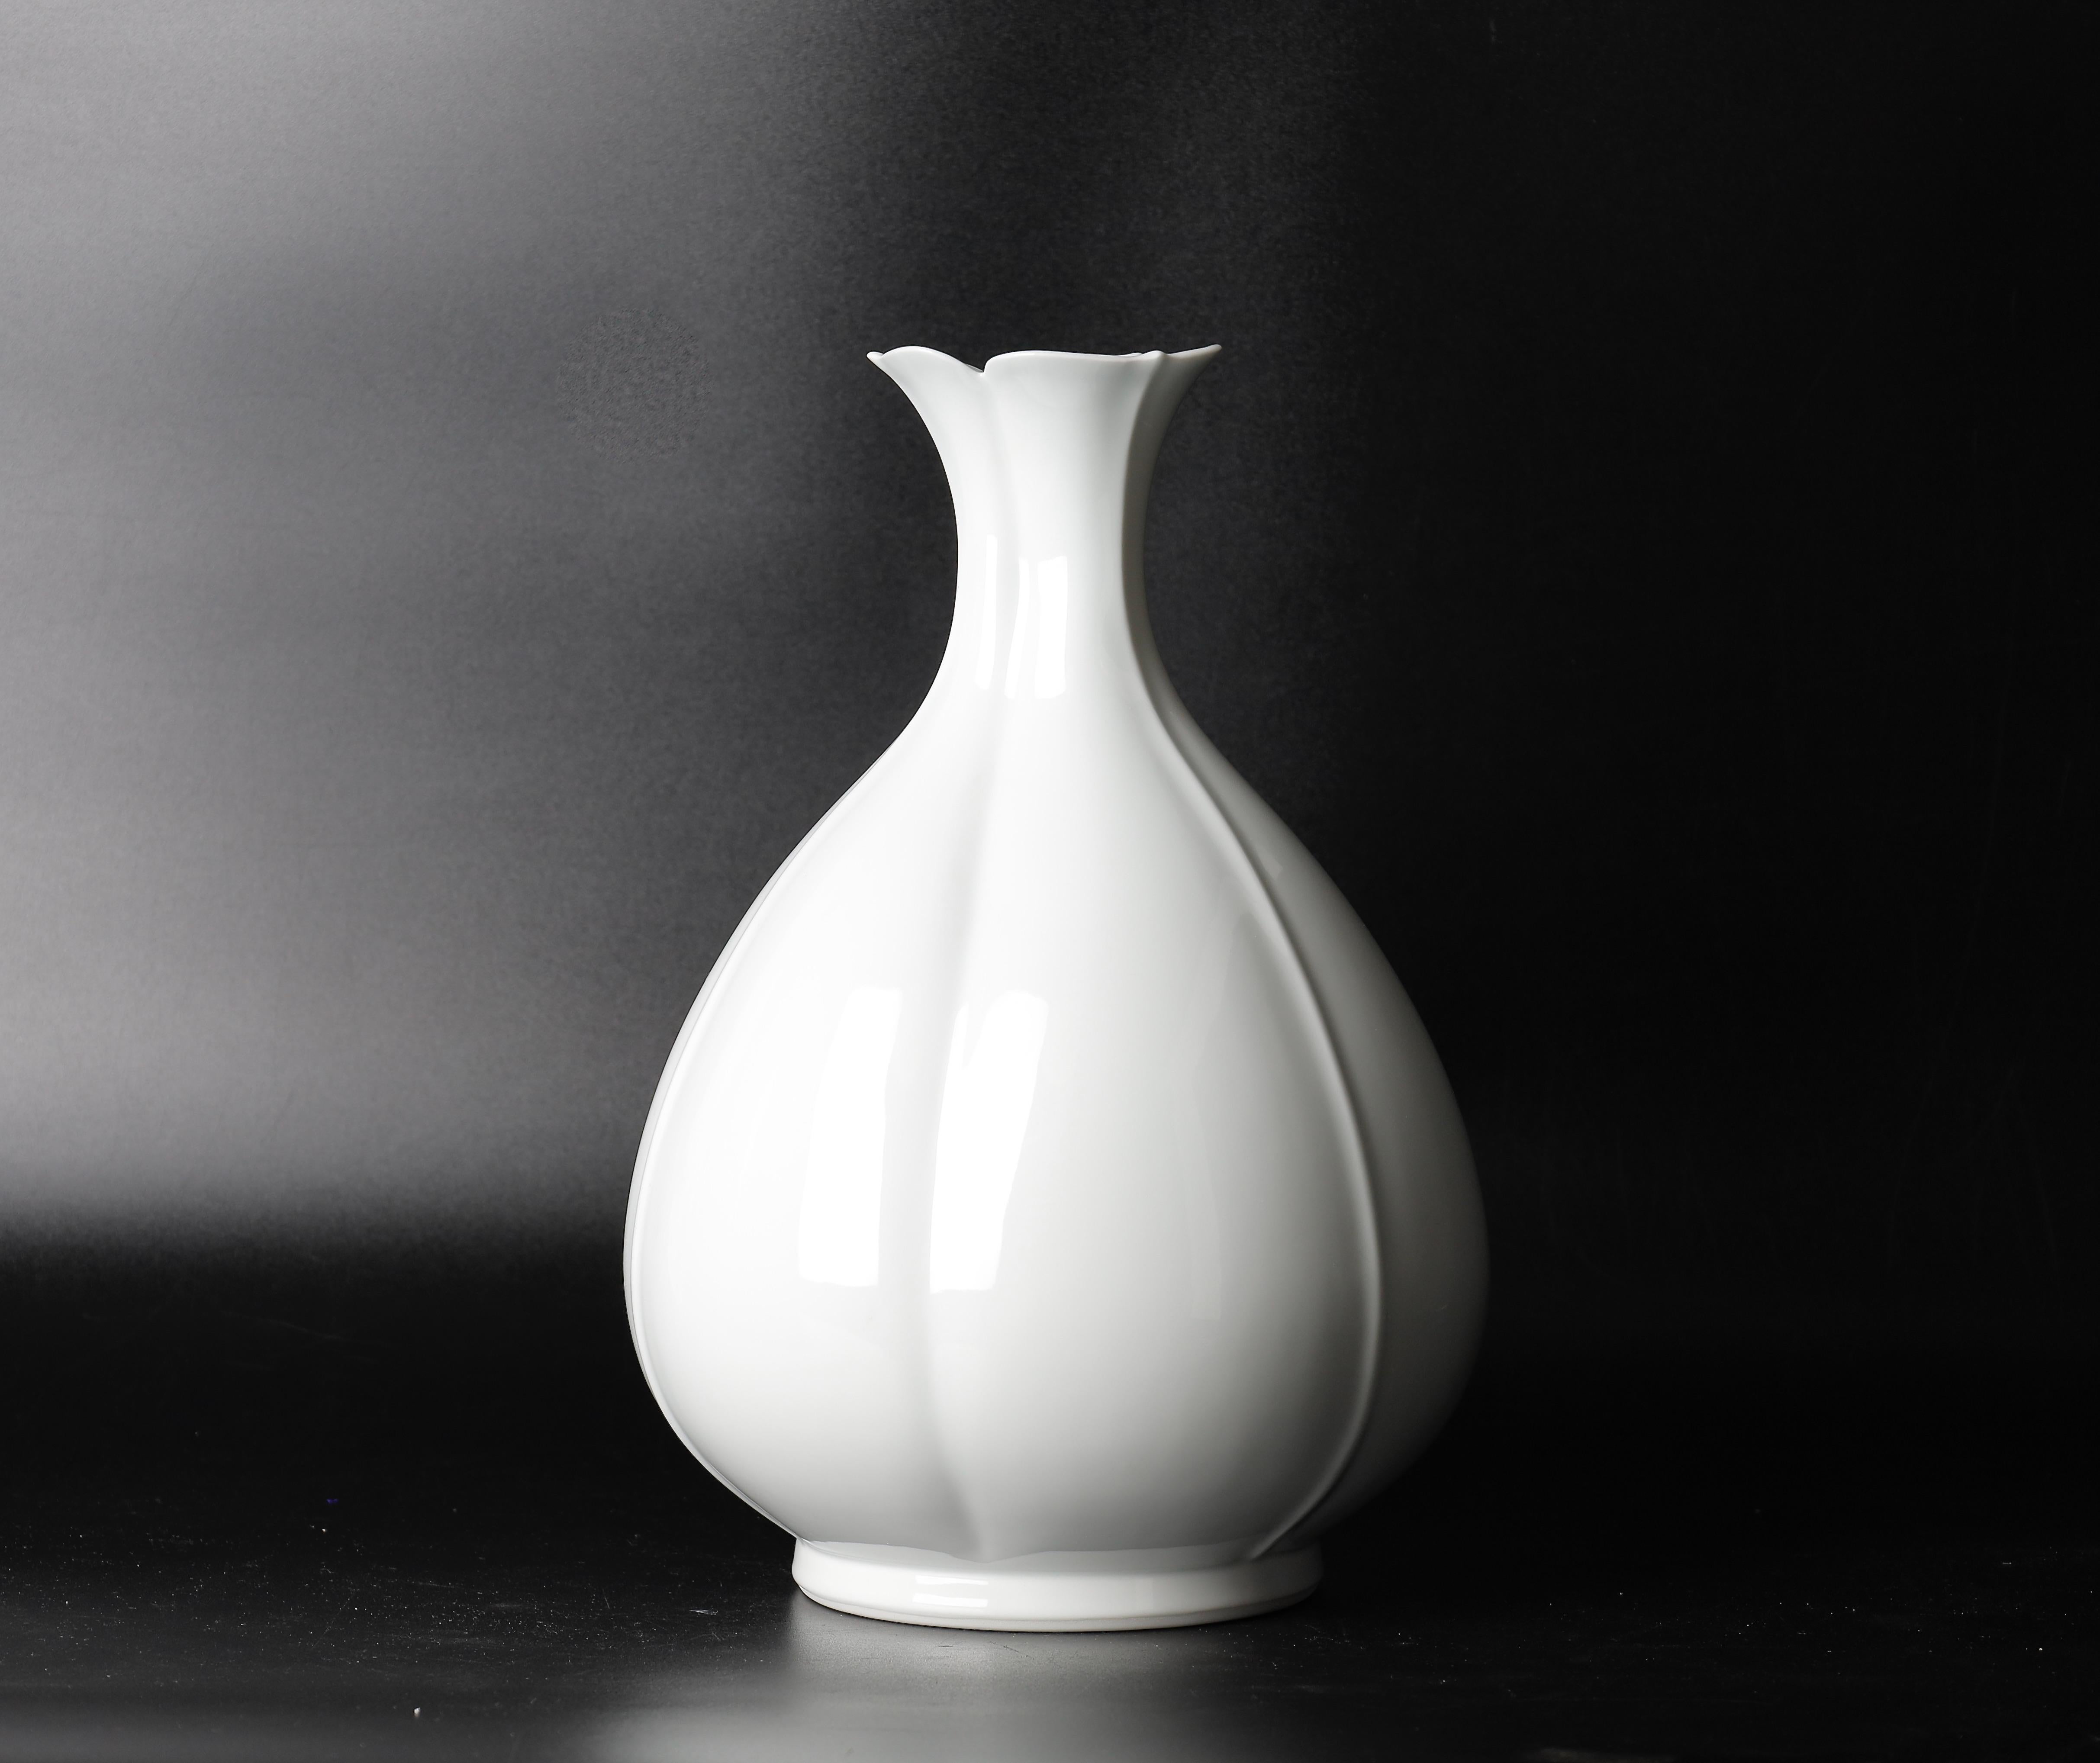 A beautiful contemporary porcelain vase by the talented Nitten artist, Nishiyama Tadashi. This elegant vase is a stunning addition to any interior design or a collector's collection. 
The vase features a flowerlike shape with a pure white color